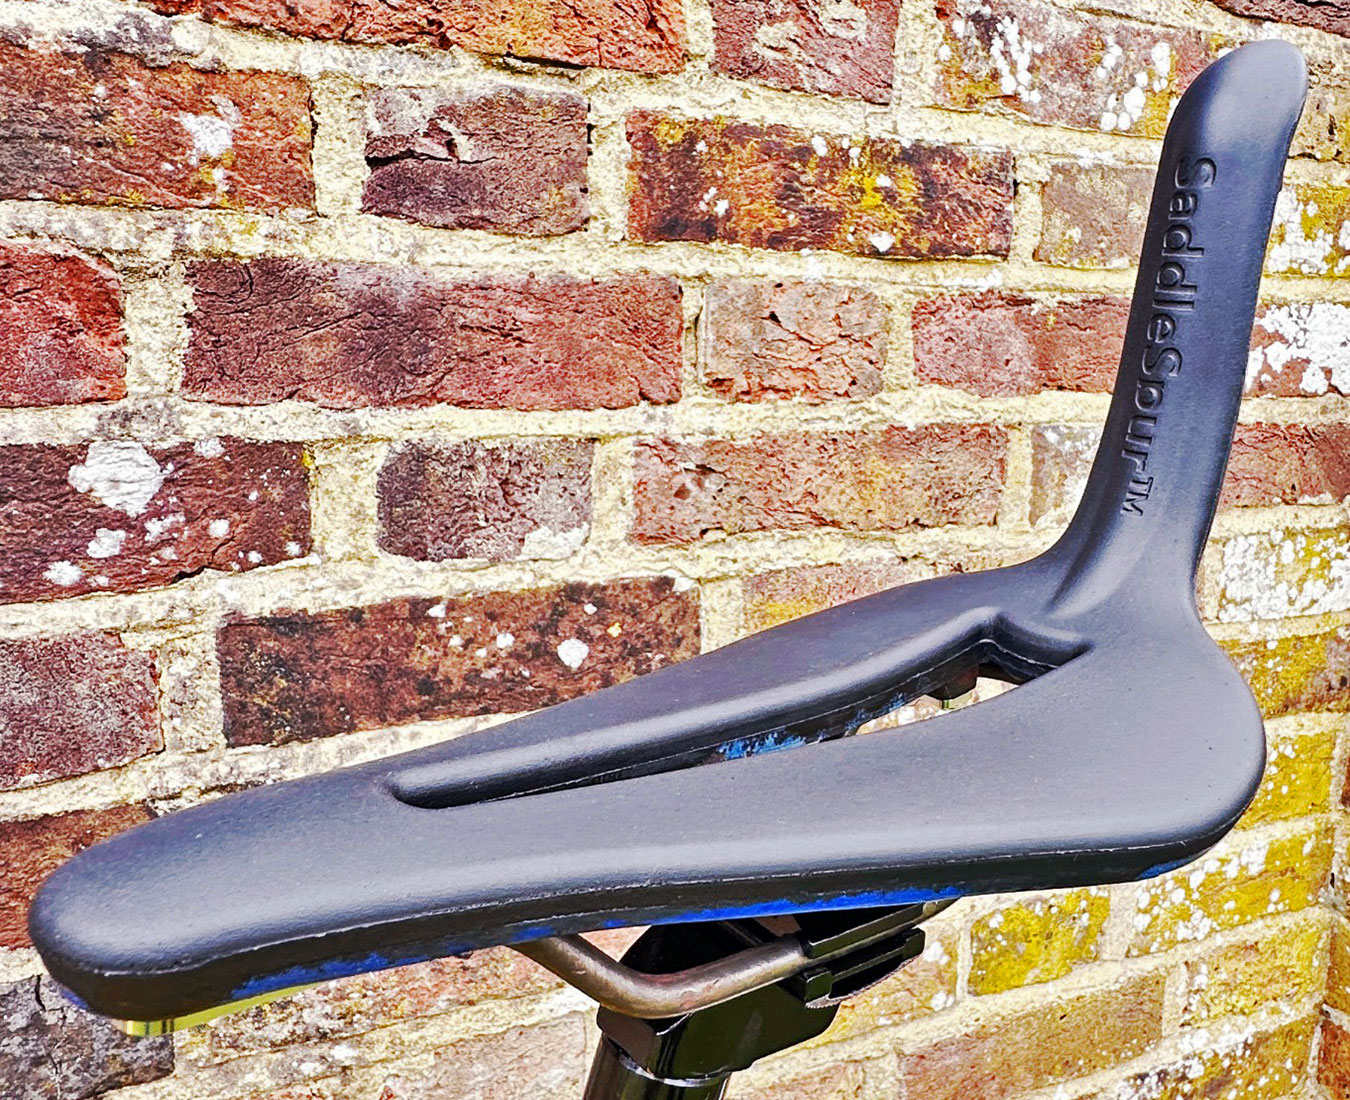 SaddleSpur unique ergonomic cycling saddle design with rear coccyx support, prototype